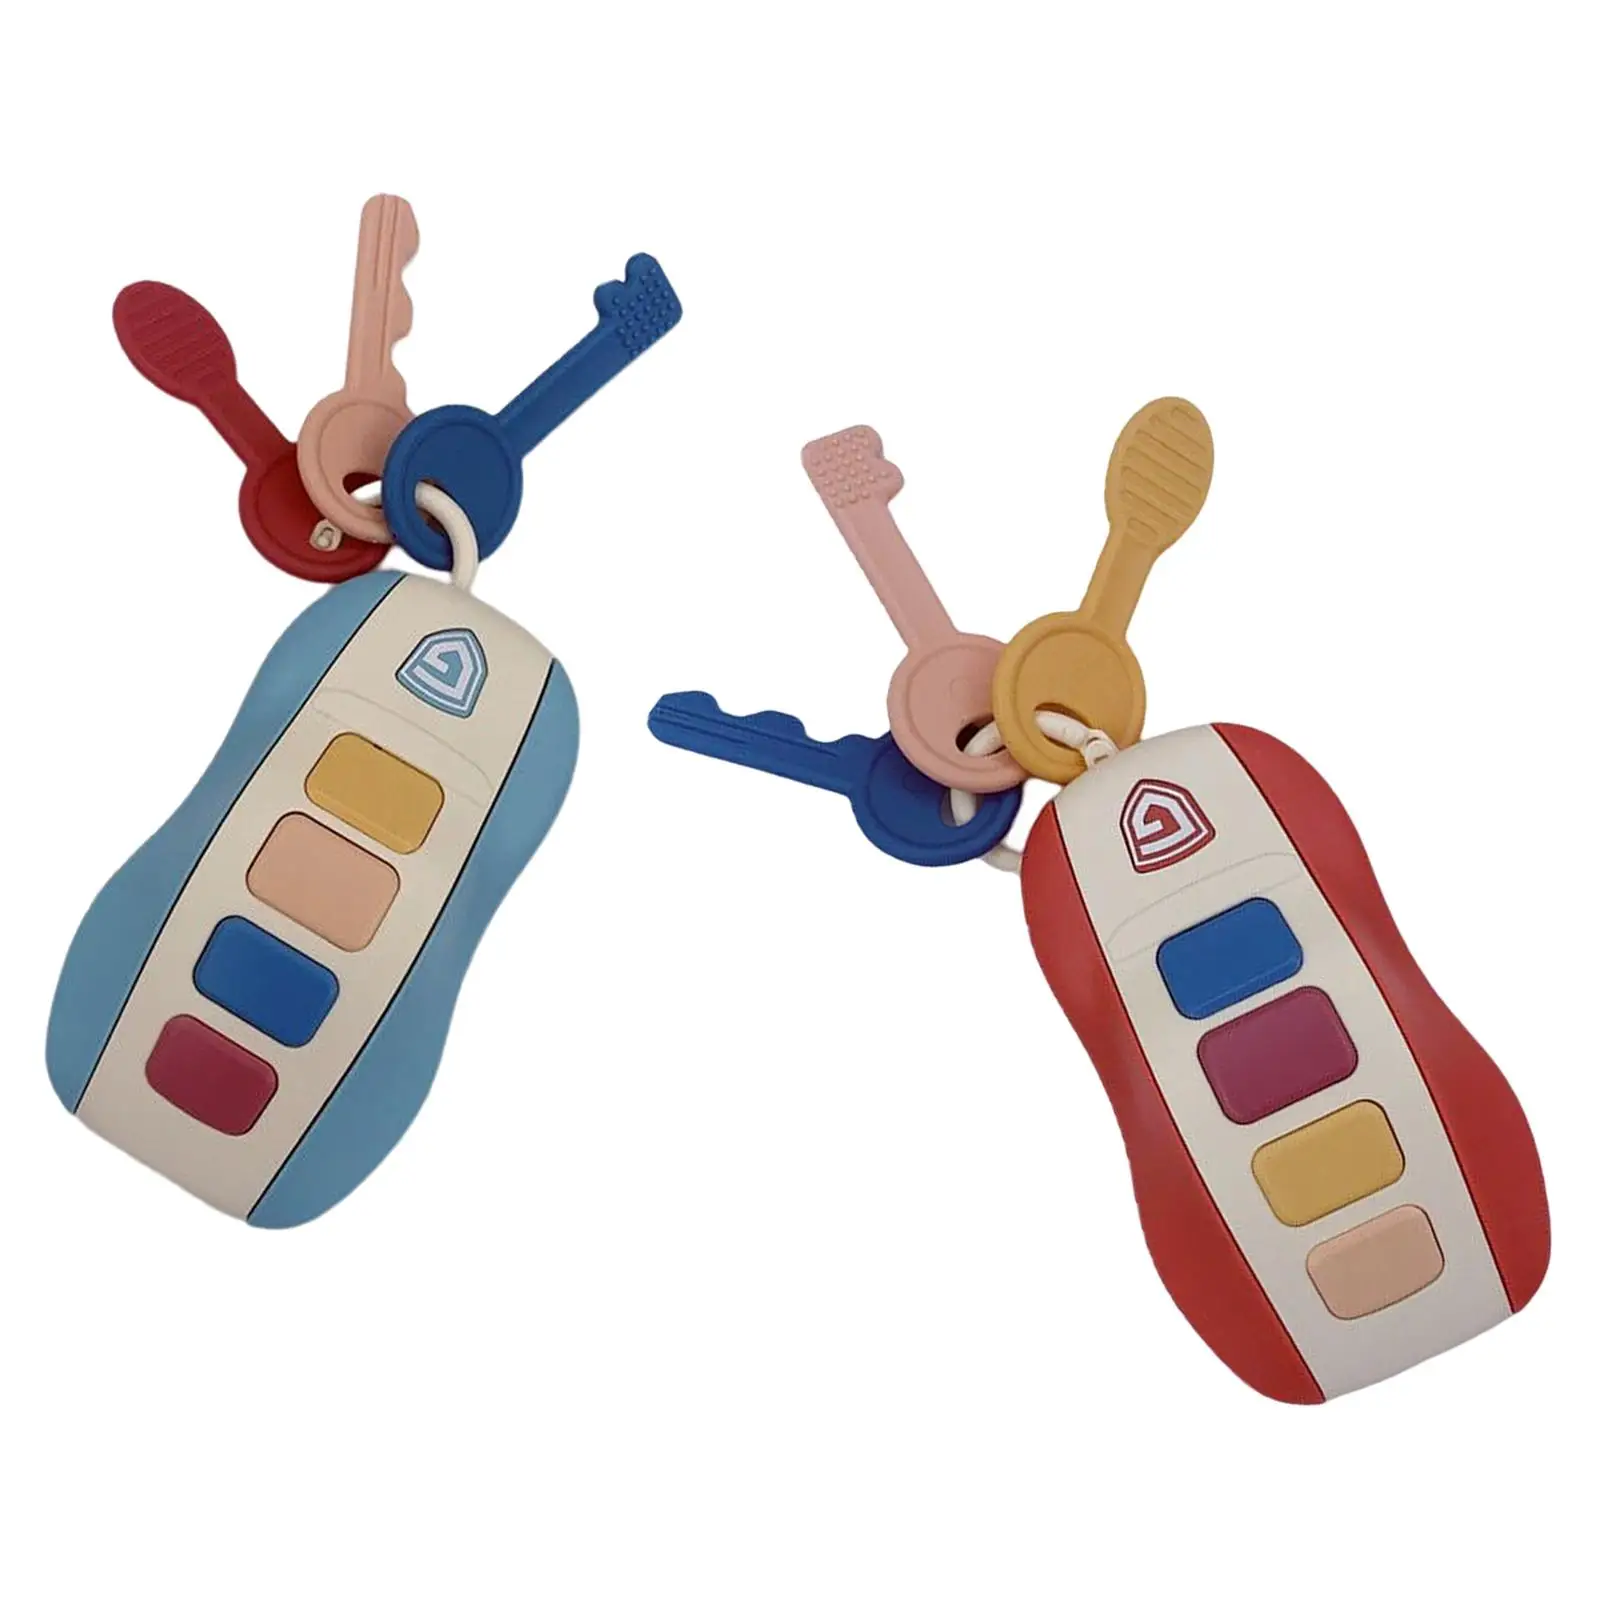 2x Musical Smart Remote Key Toy Electronic Pets for Toddler Birthday Gifts